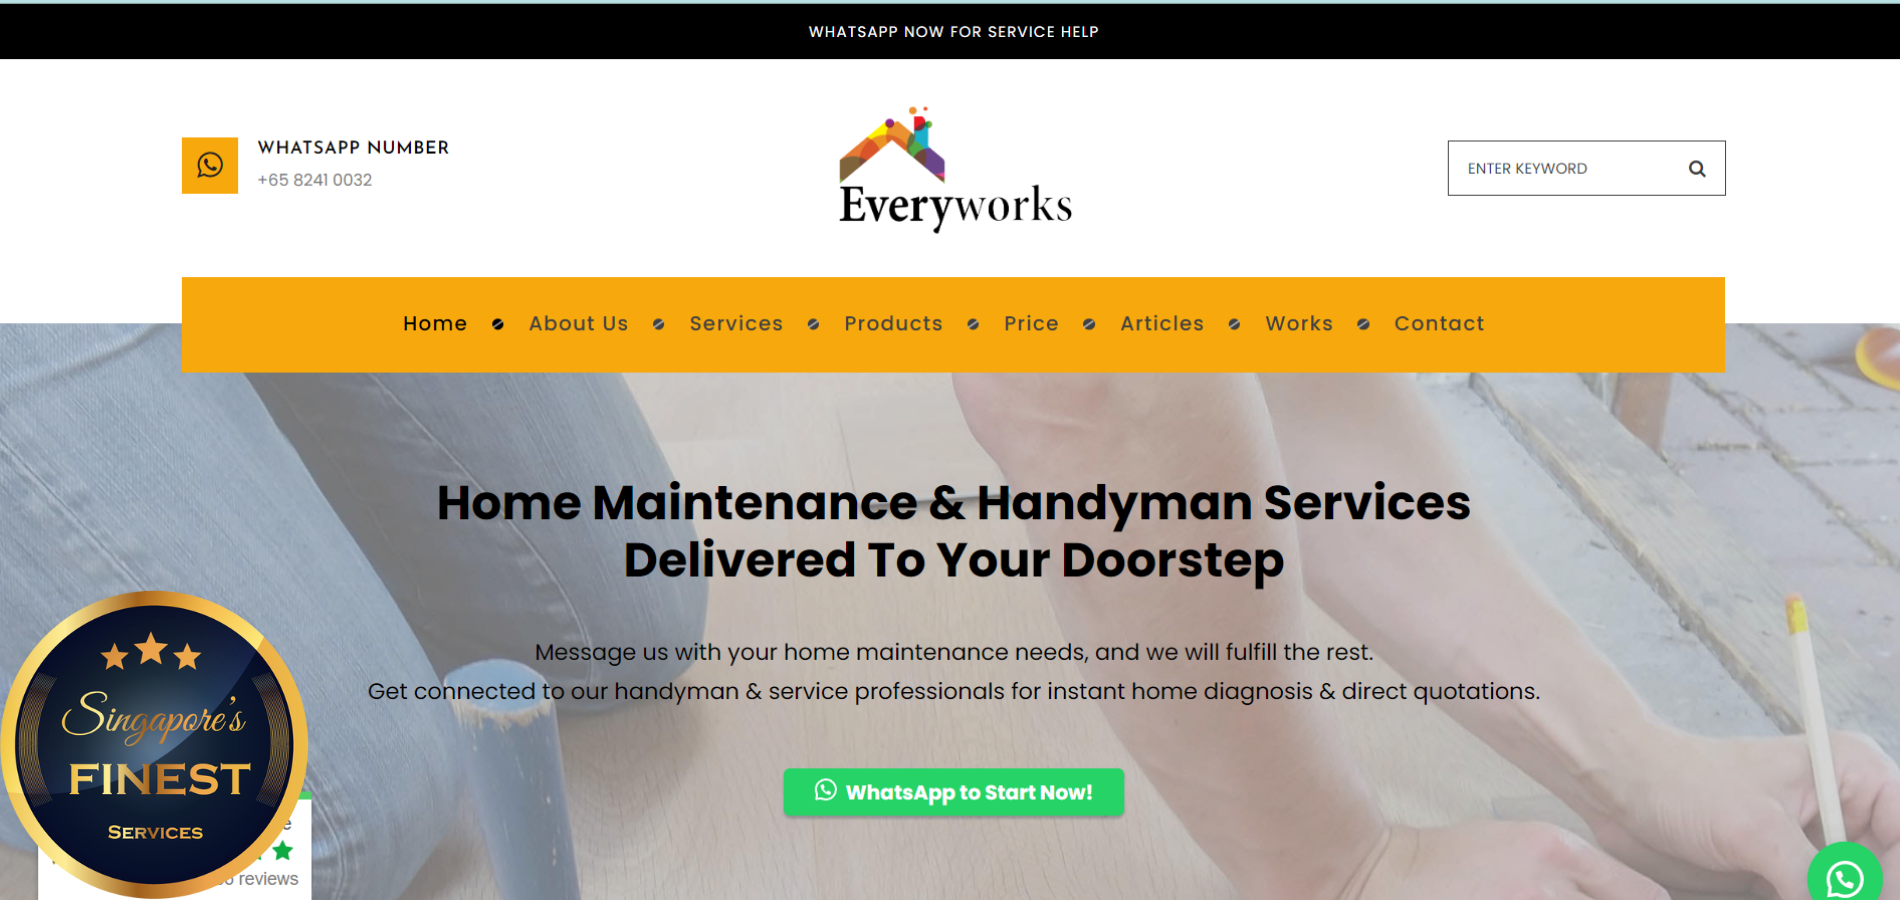 The Finest Handyman Services in Singapore